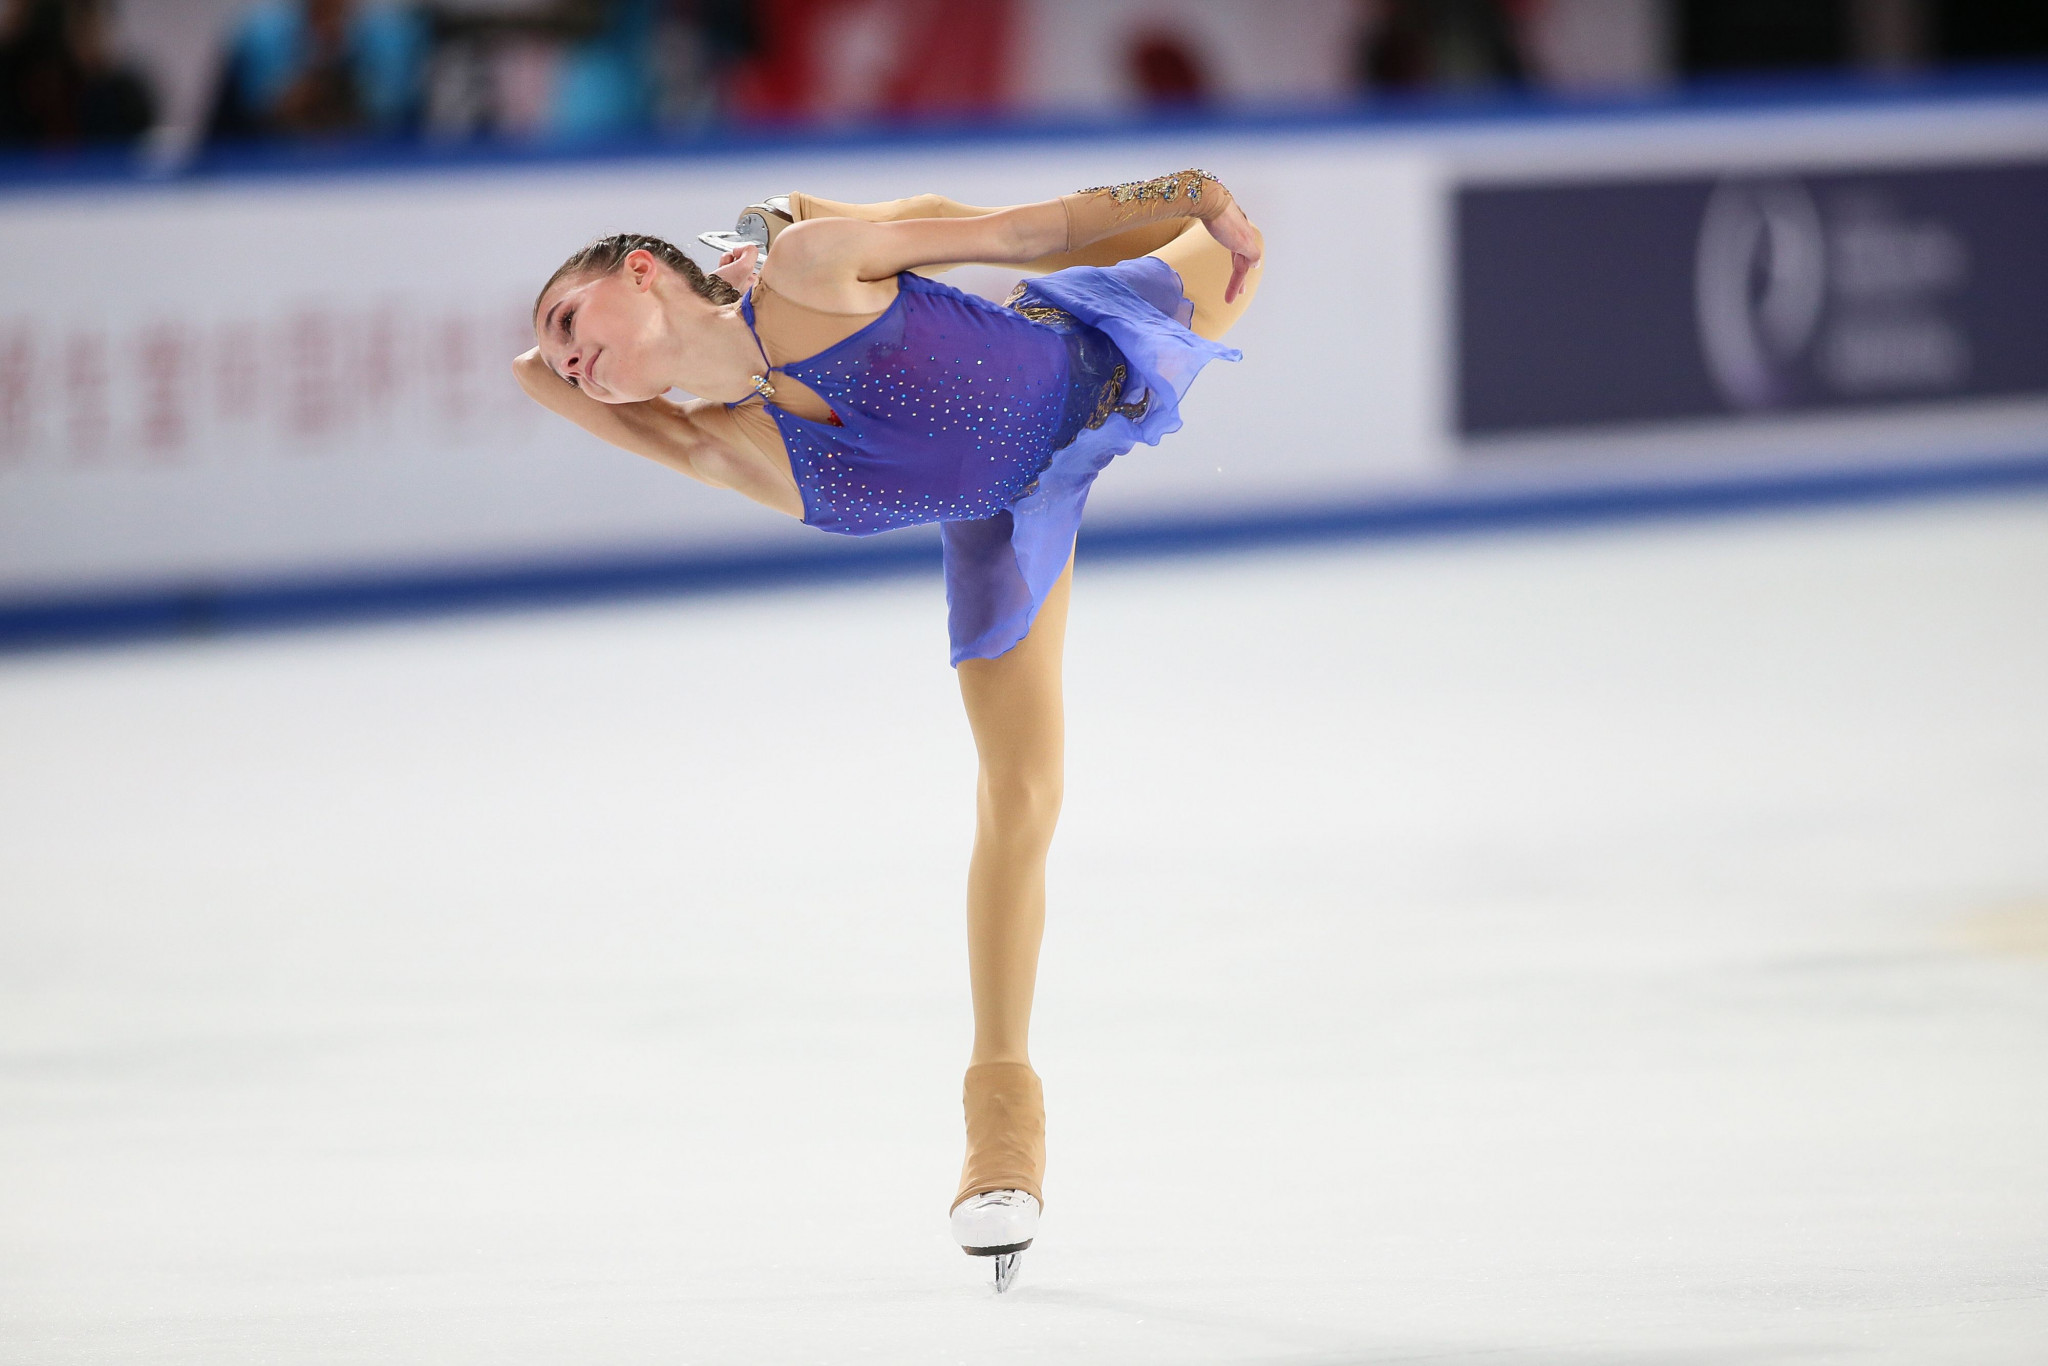 Anna Shcherbakova won the women's competition ©Getty Images